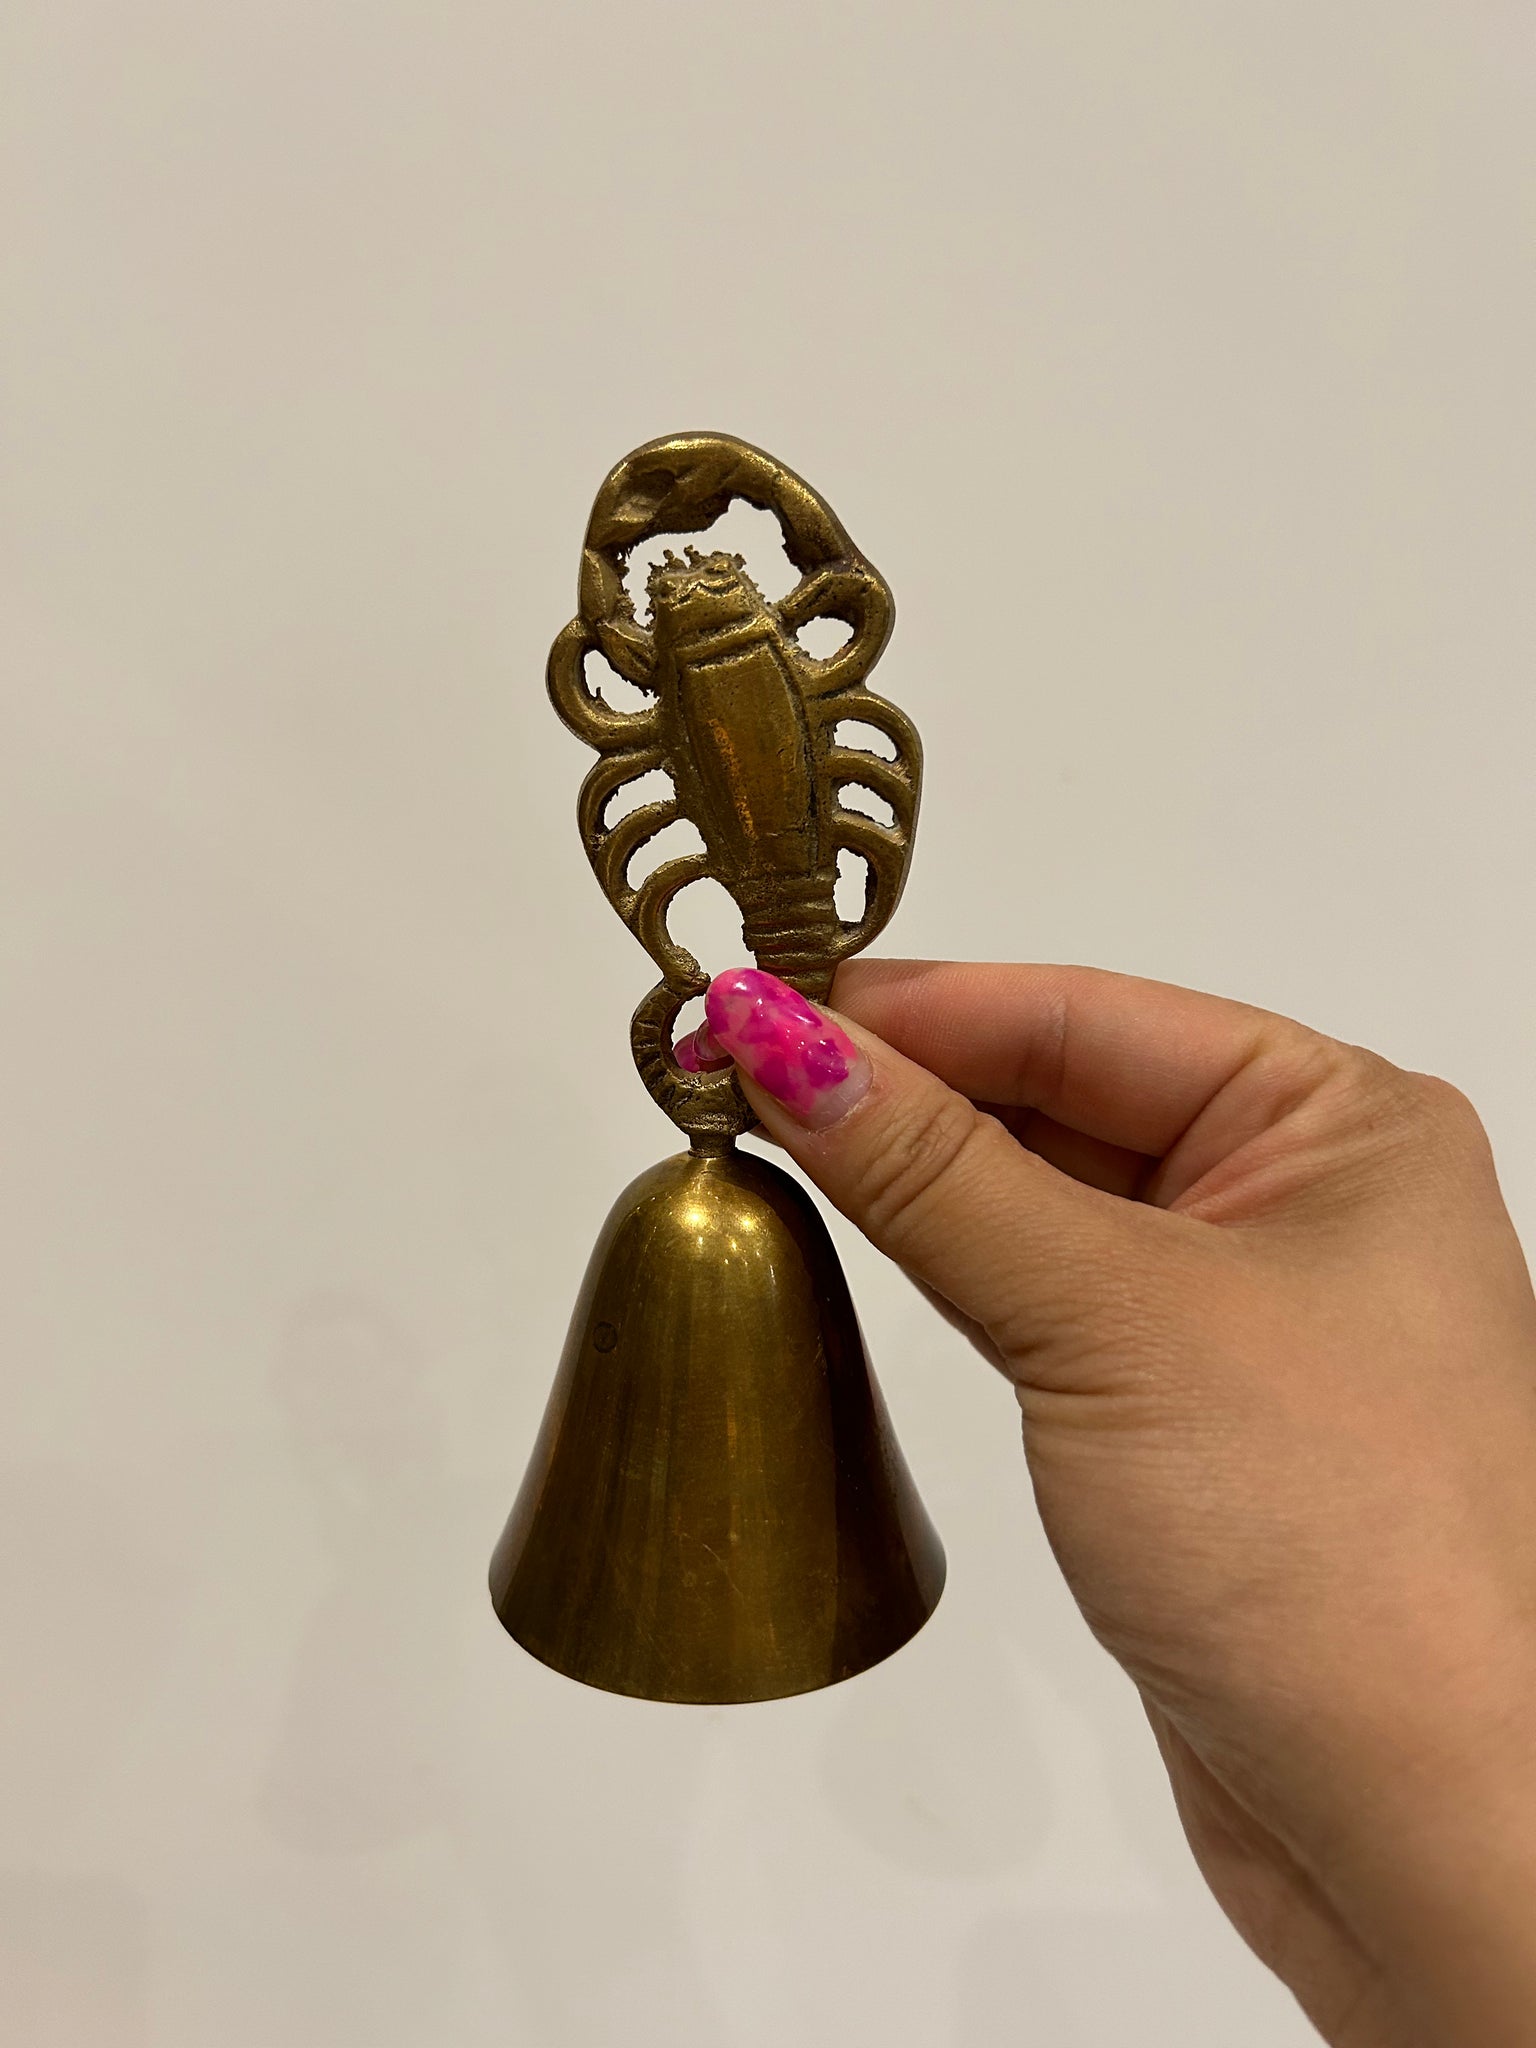 Selection of solid brass bells